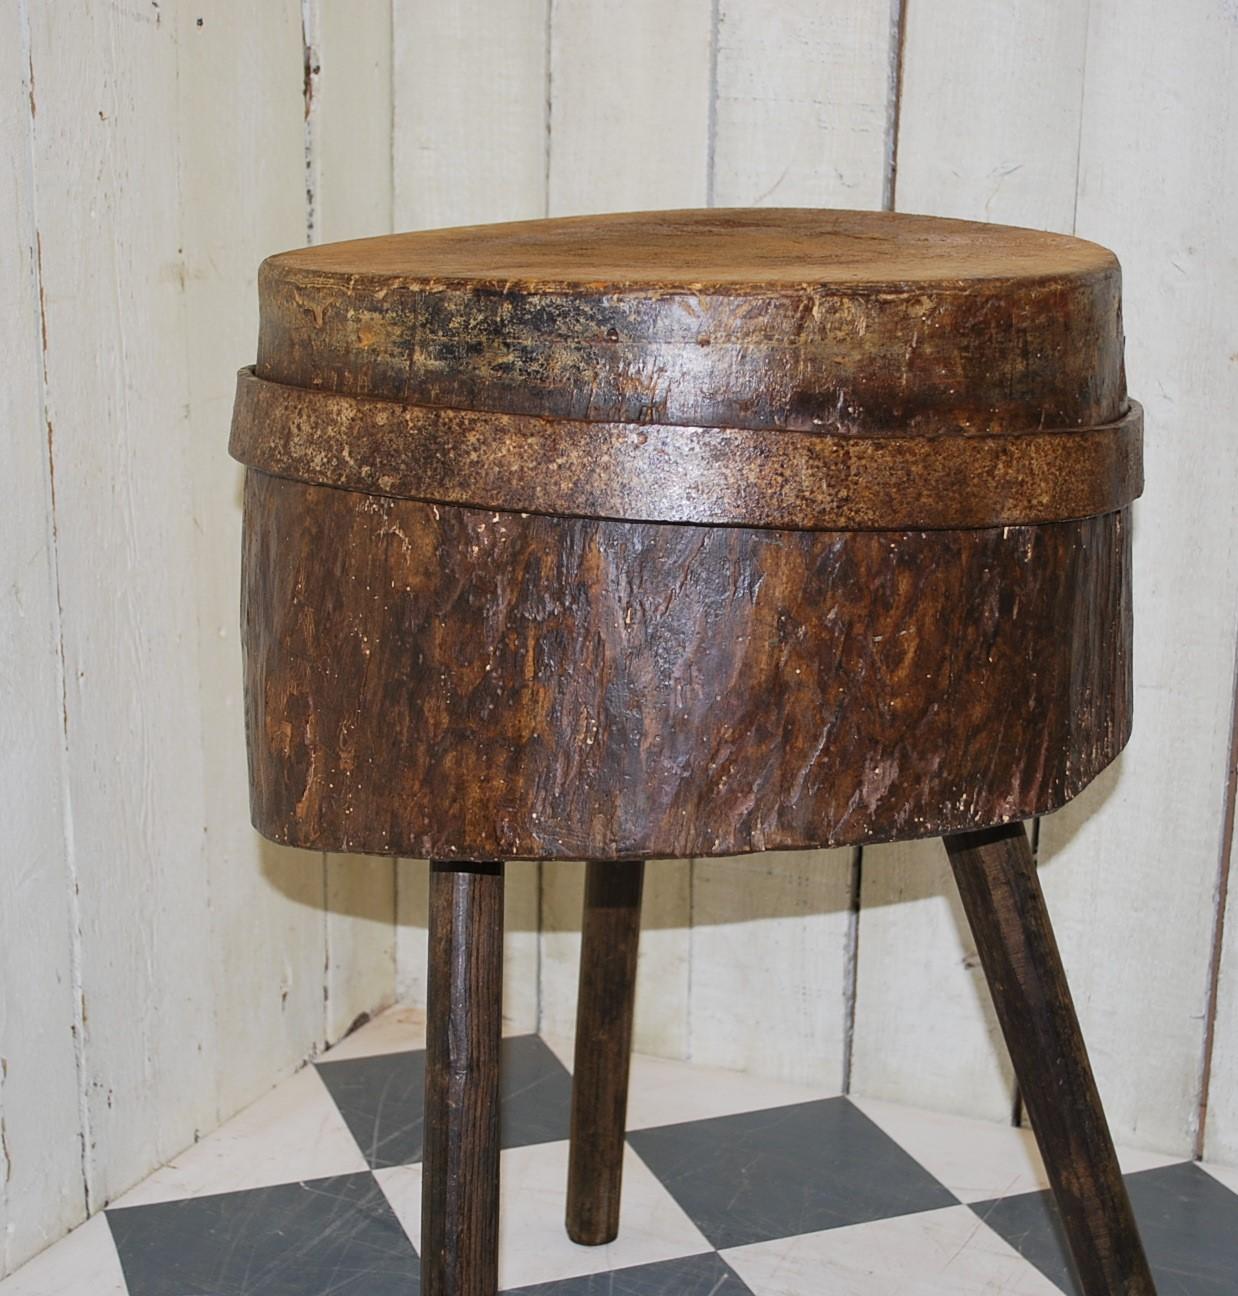 Unusual primitive tripod chopping block or occasional table. Standing on three chamfered legs set into a thick section of trunk with a blacksmith made band placed around the exterior. Great as a lamp table in a modern or period table. A real talking